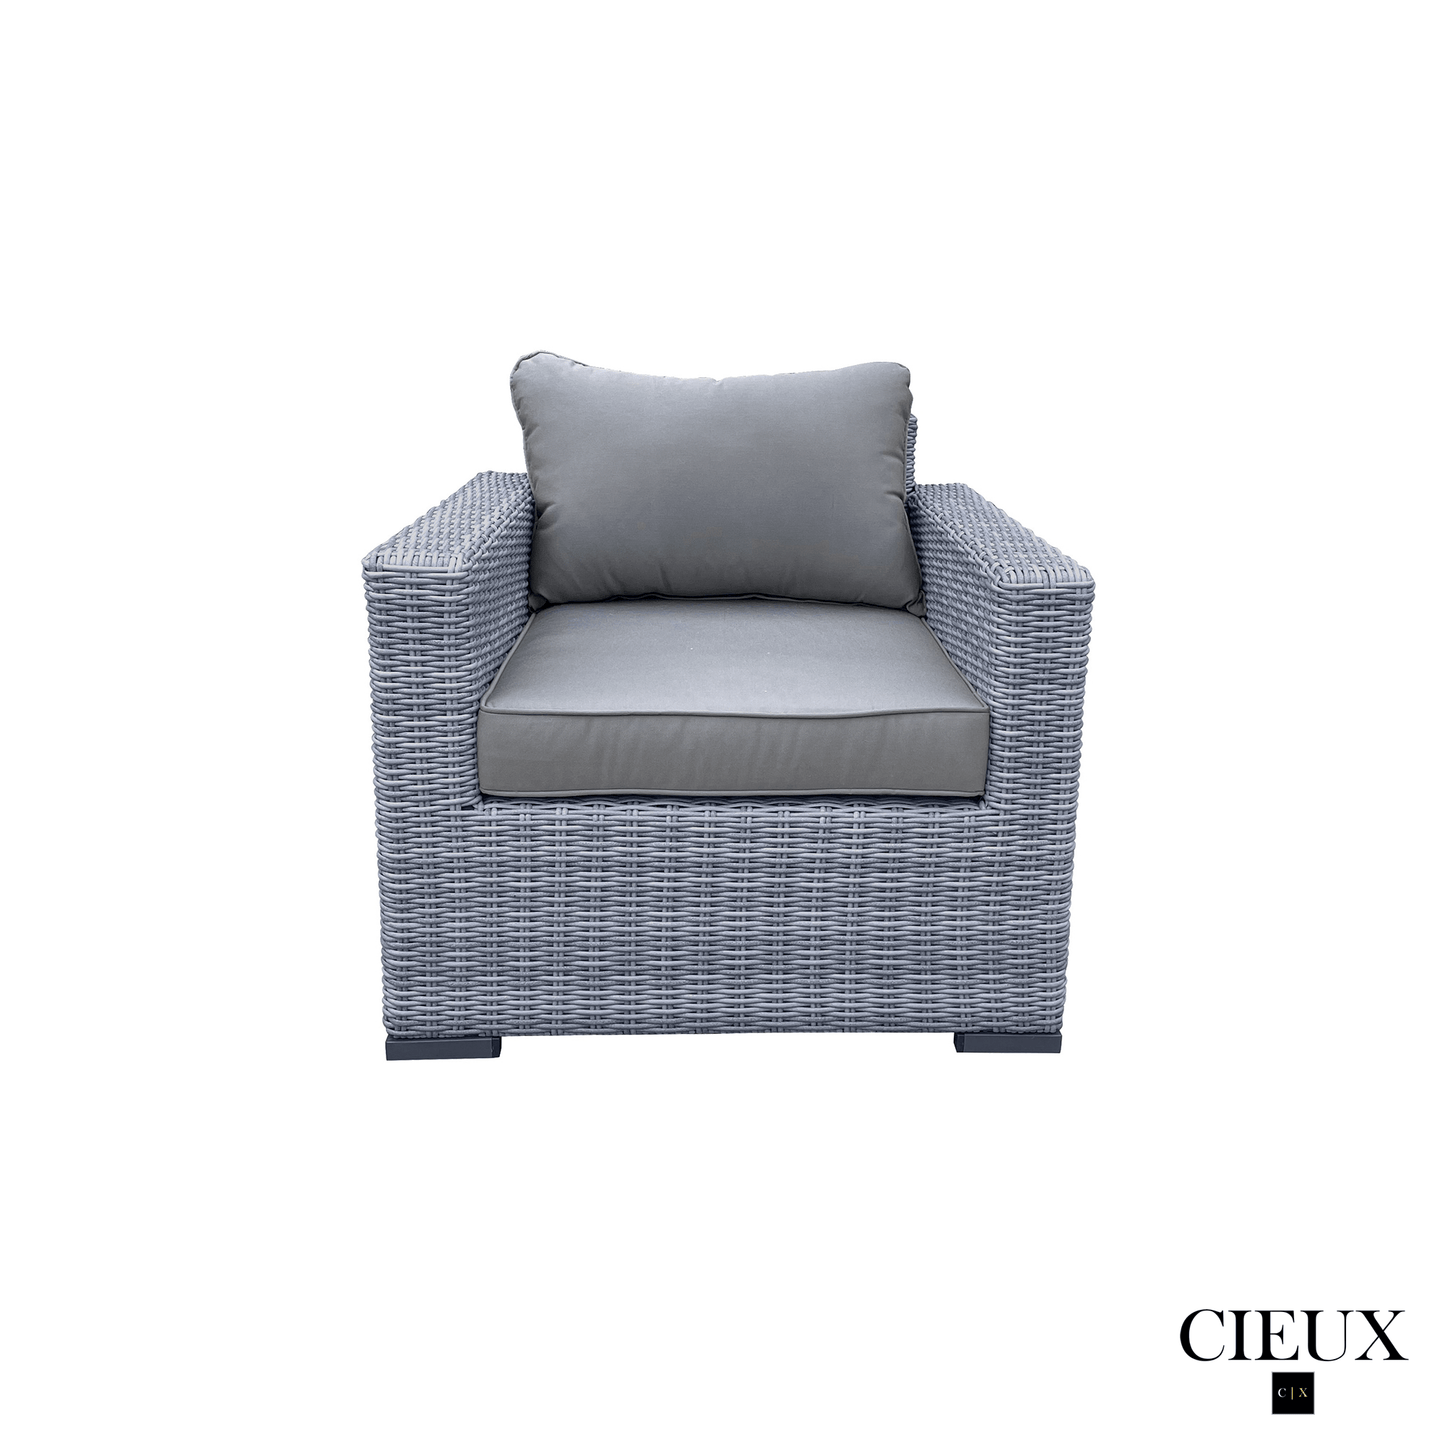 CIEUX Conversation Set Cannes Outdoor Patio Wicker Loveseat Conversation Set in Grey with Sunbrella Cushions - Available in 2 Colours